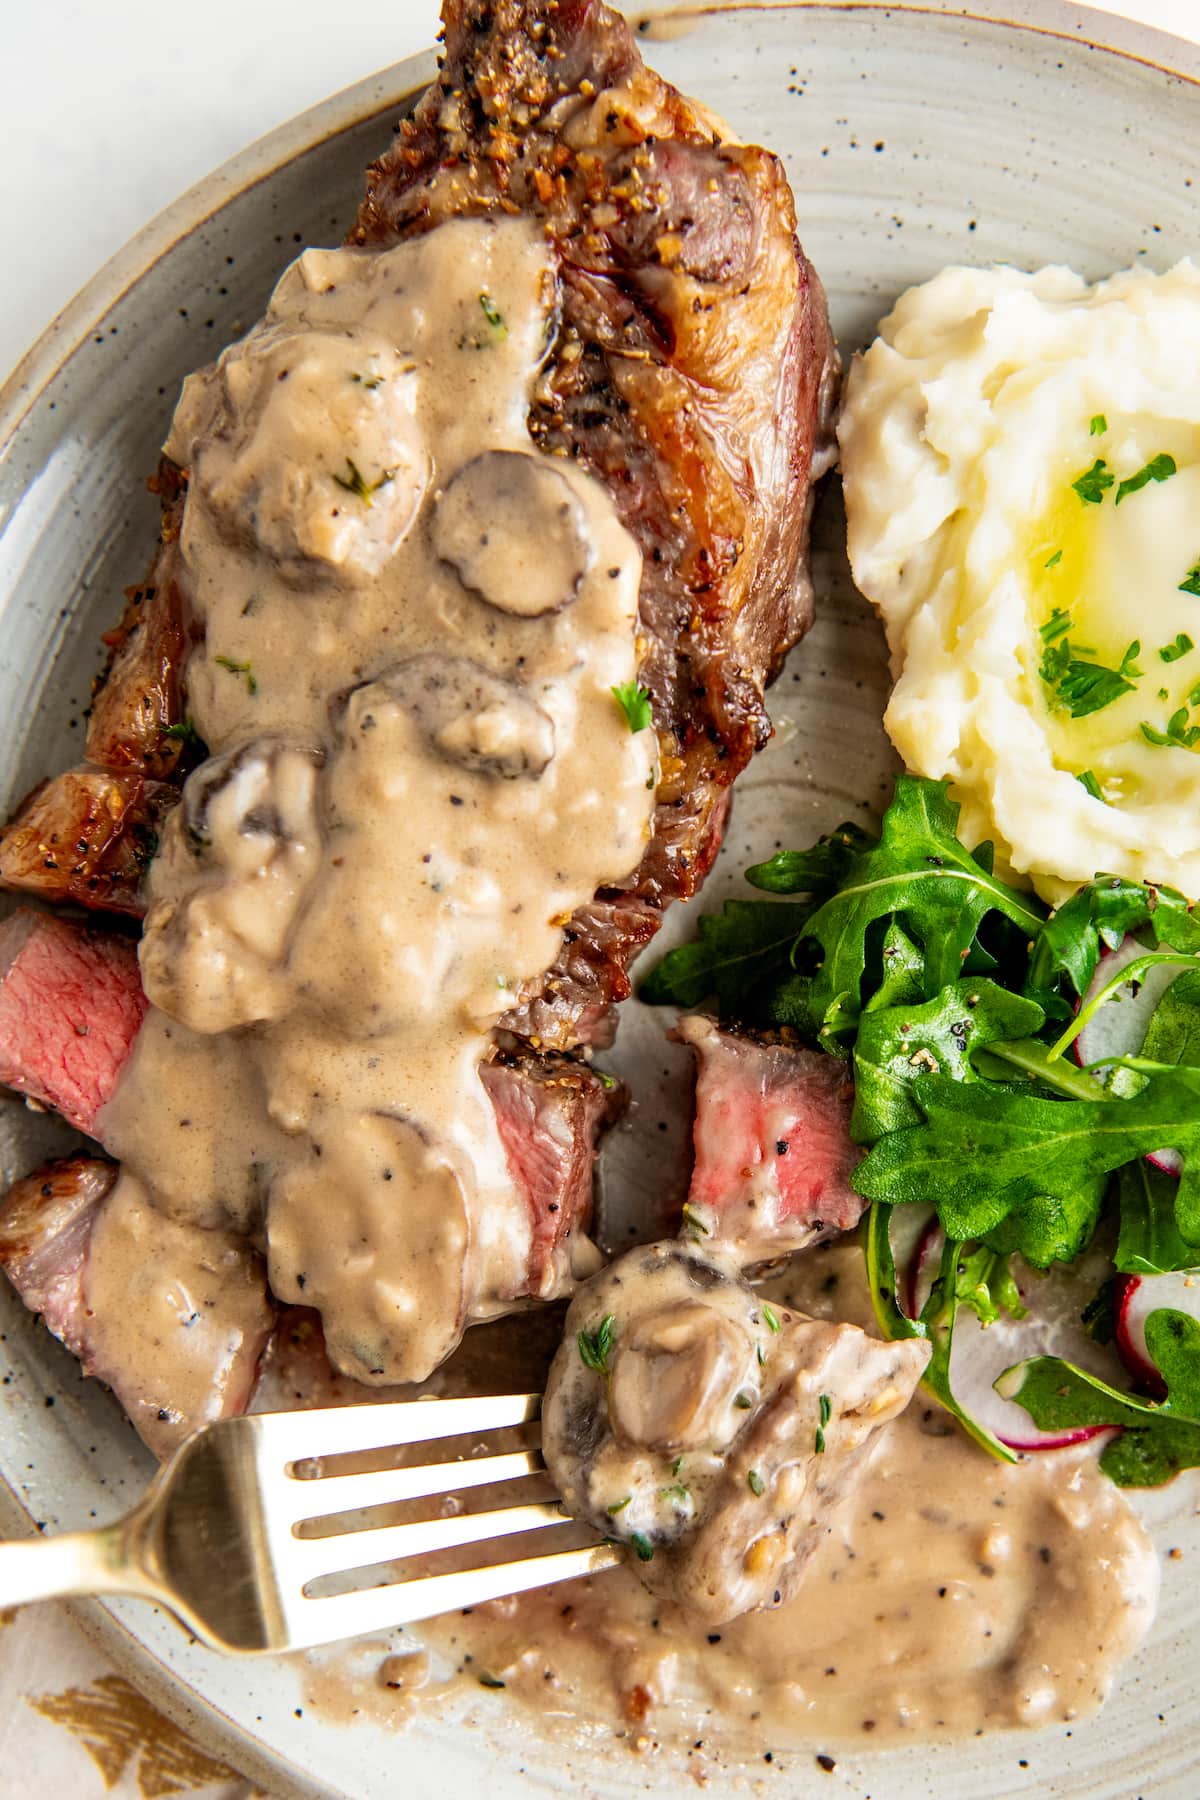 A bite of steak with mushroom cream sauce on a plate with a fork.